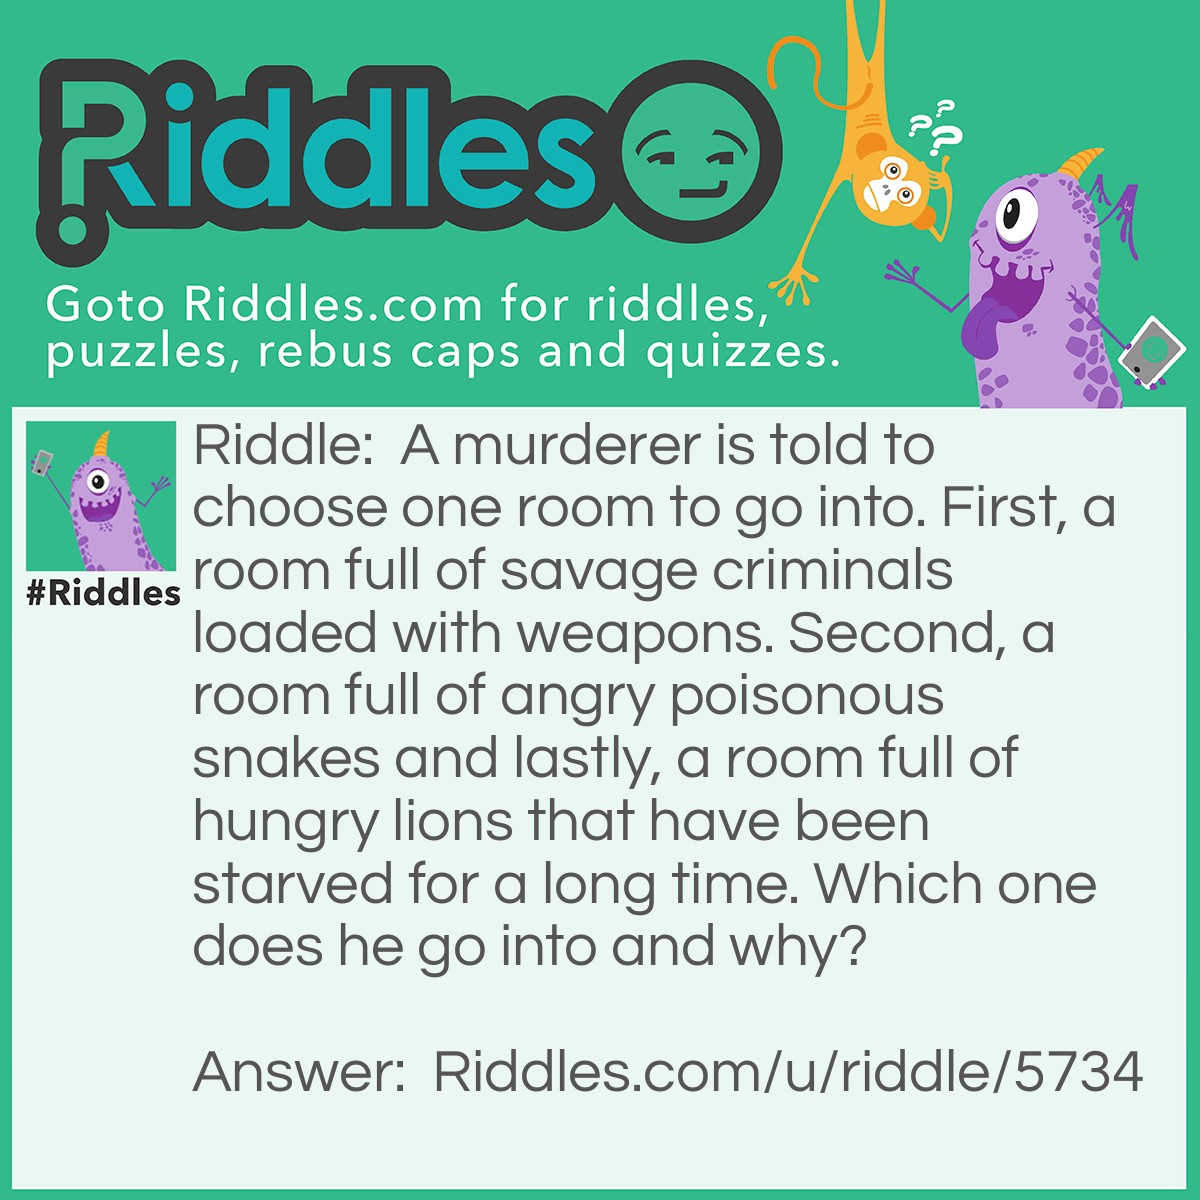 Riddle: A murderer is told to choose one room to go into. First, a room full of savage criminals loaded with weapons. Second, a room full of angry poisonous snakes and lastly, a room full of hungry lions that have been starved for a long time. Which one does he go into and why? Answer: He goes into the last, because the lion would not have lasted so long.